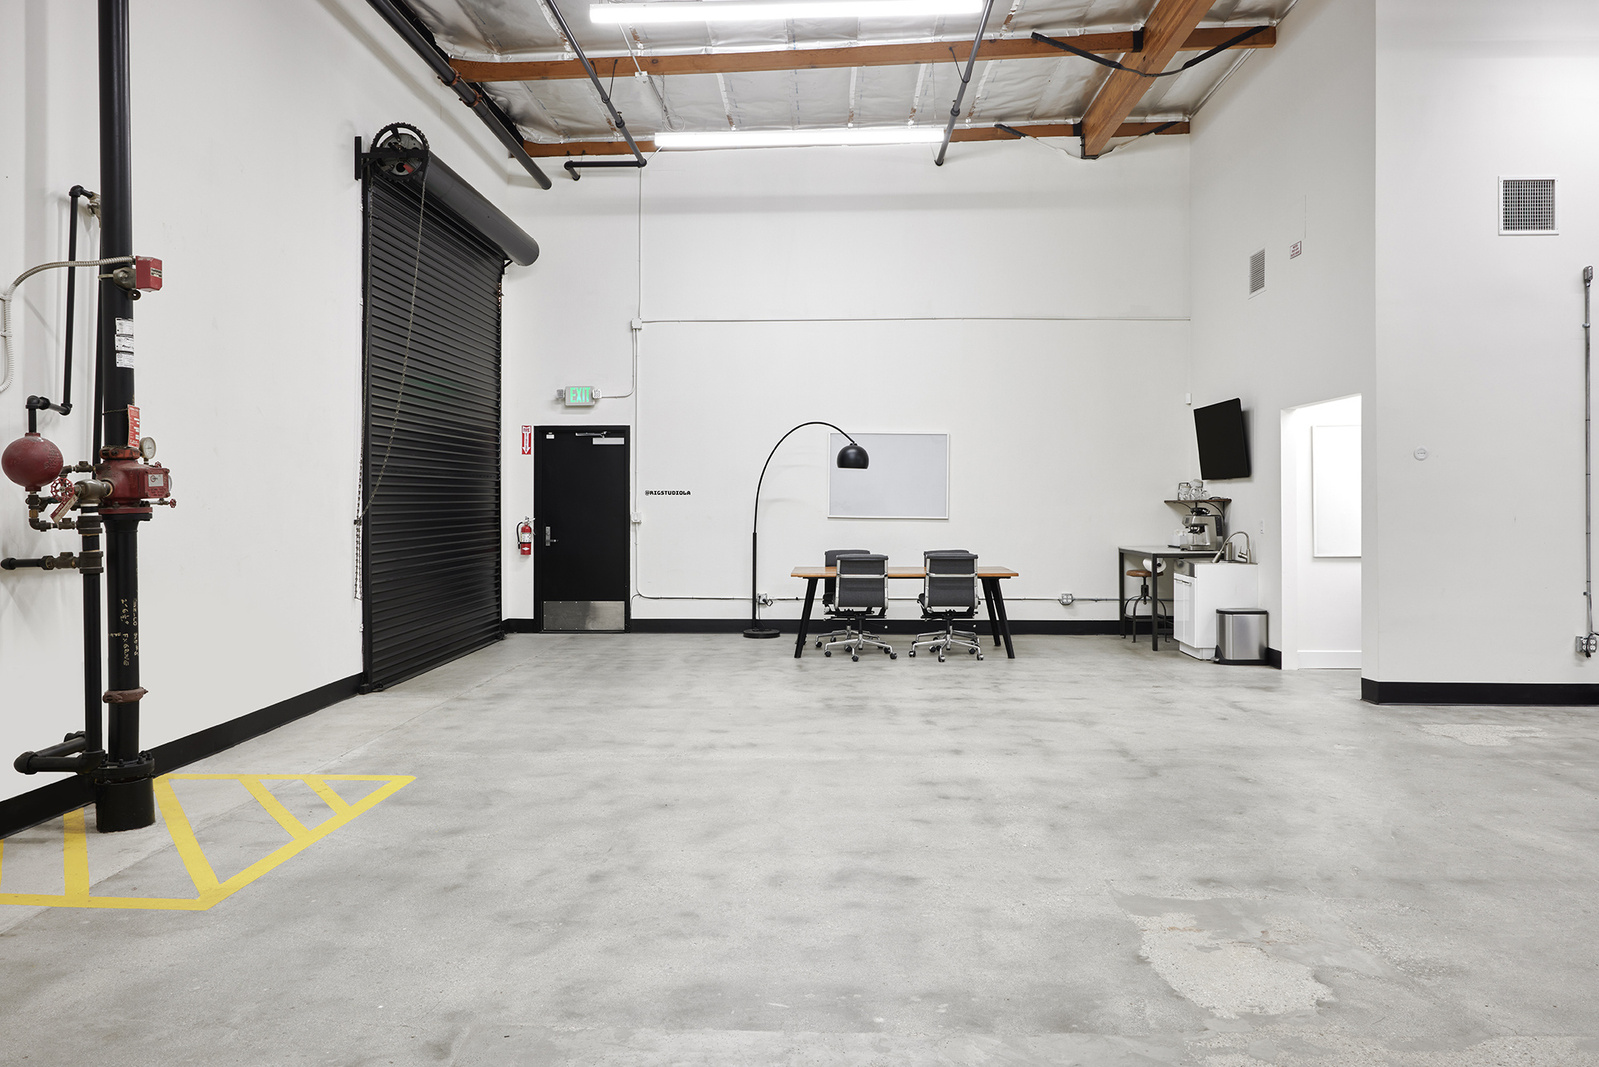 Los Angeles professional and affordable photo studio for photography and video production. Fully loaded with high-quality equipment: Broncolor, Aputure, Grip, and Digital equipment. Main Studio.
